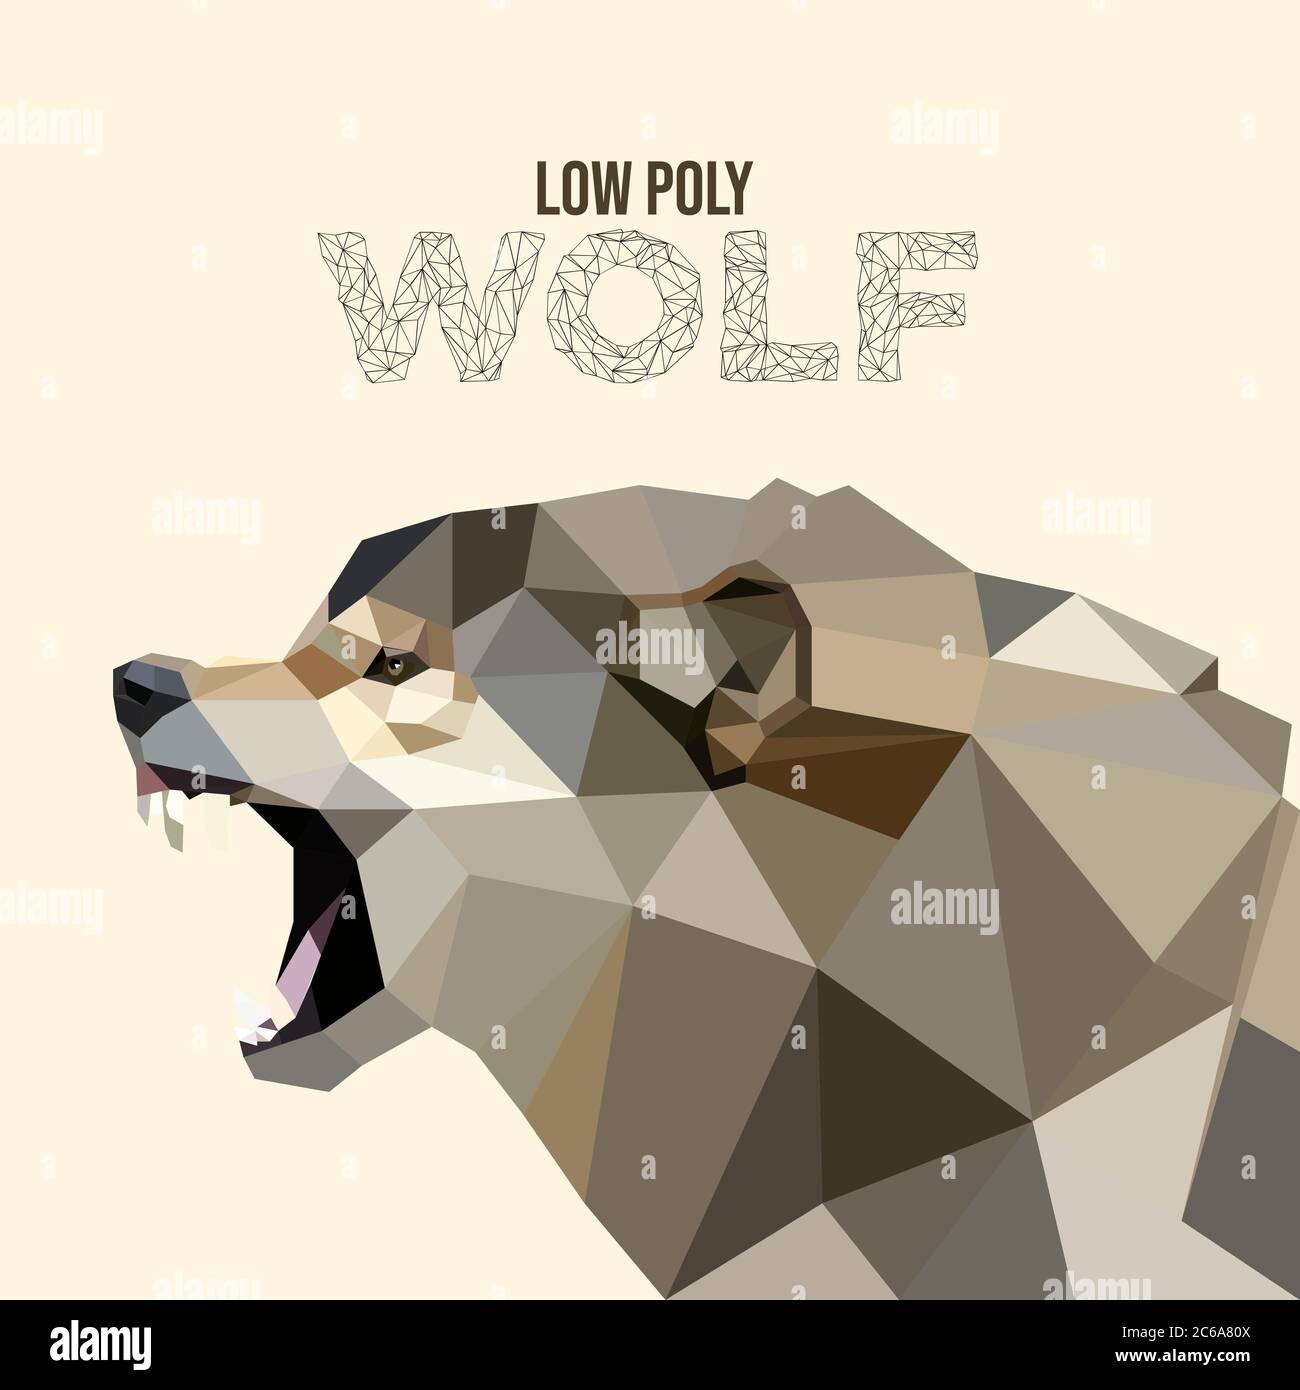 Low poly Wolf art, wolf roar, animal low poly illustration background template, poster, vector Stock Vector